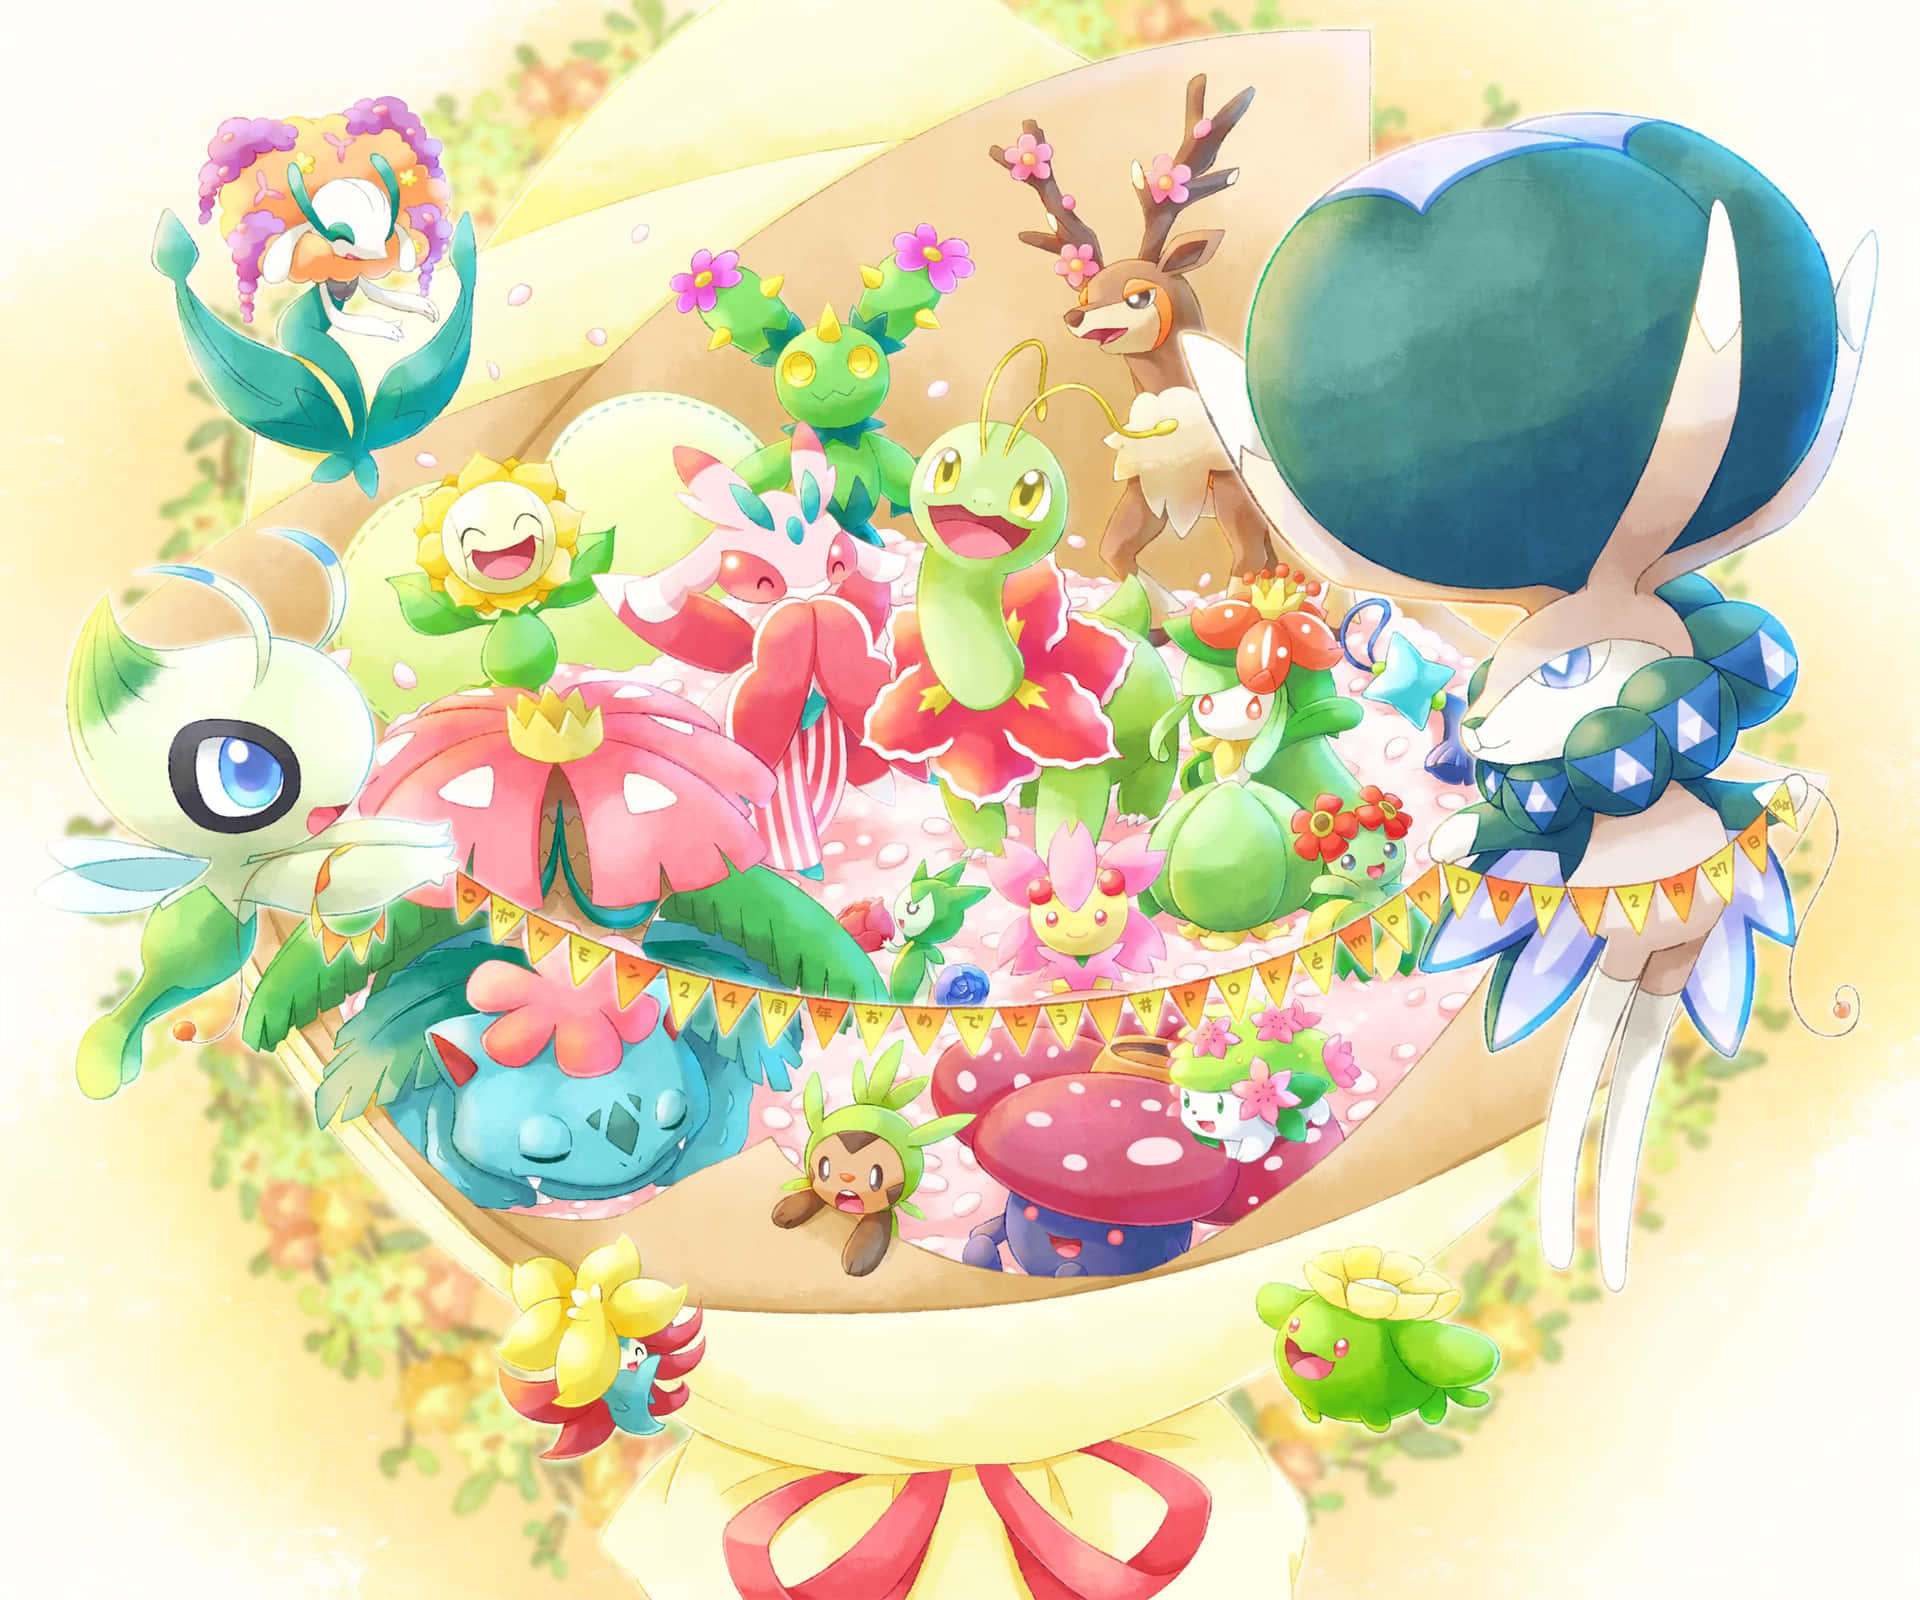 Calyrex With Other Pokemon Cute Artwork Wallpaper